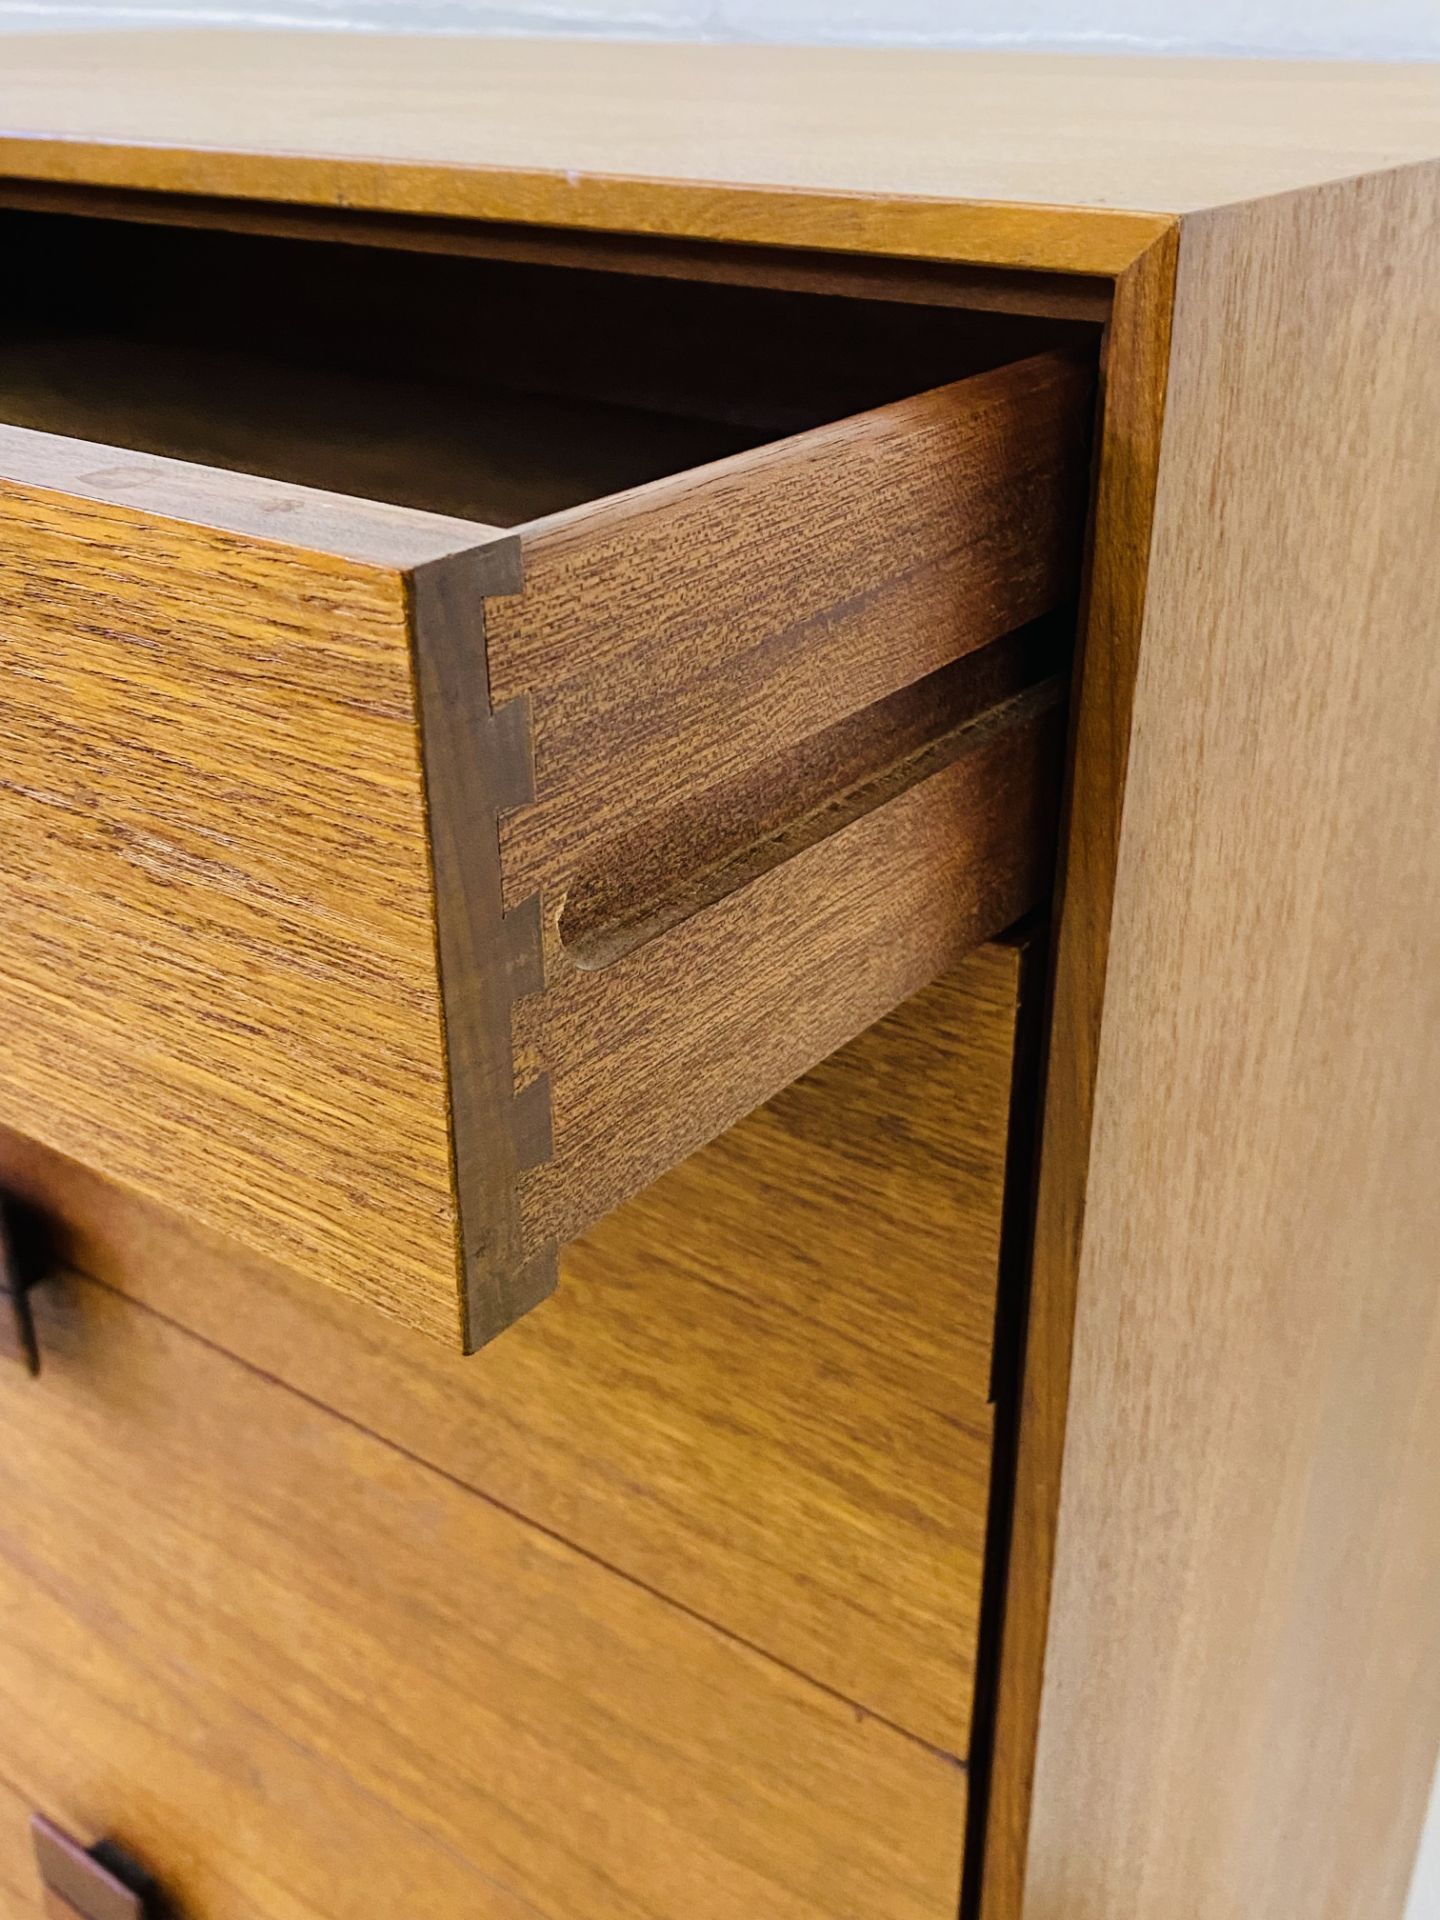 Teak G plan chest of drawers - Image 3 of 6